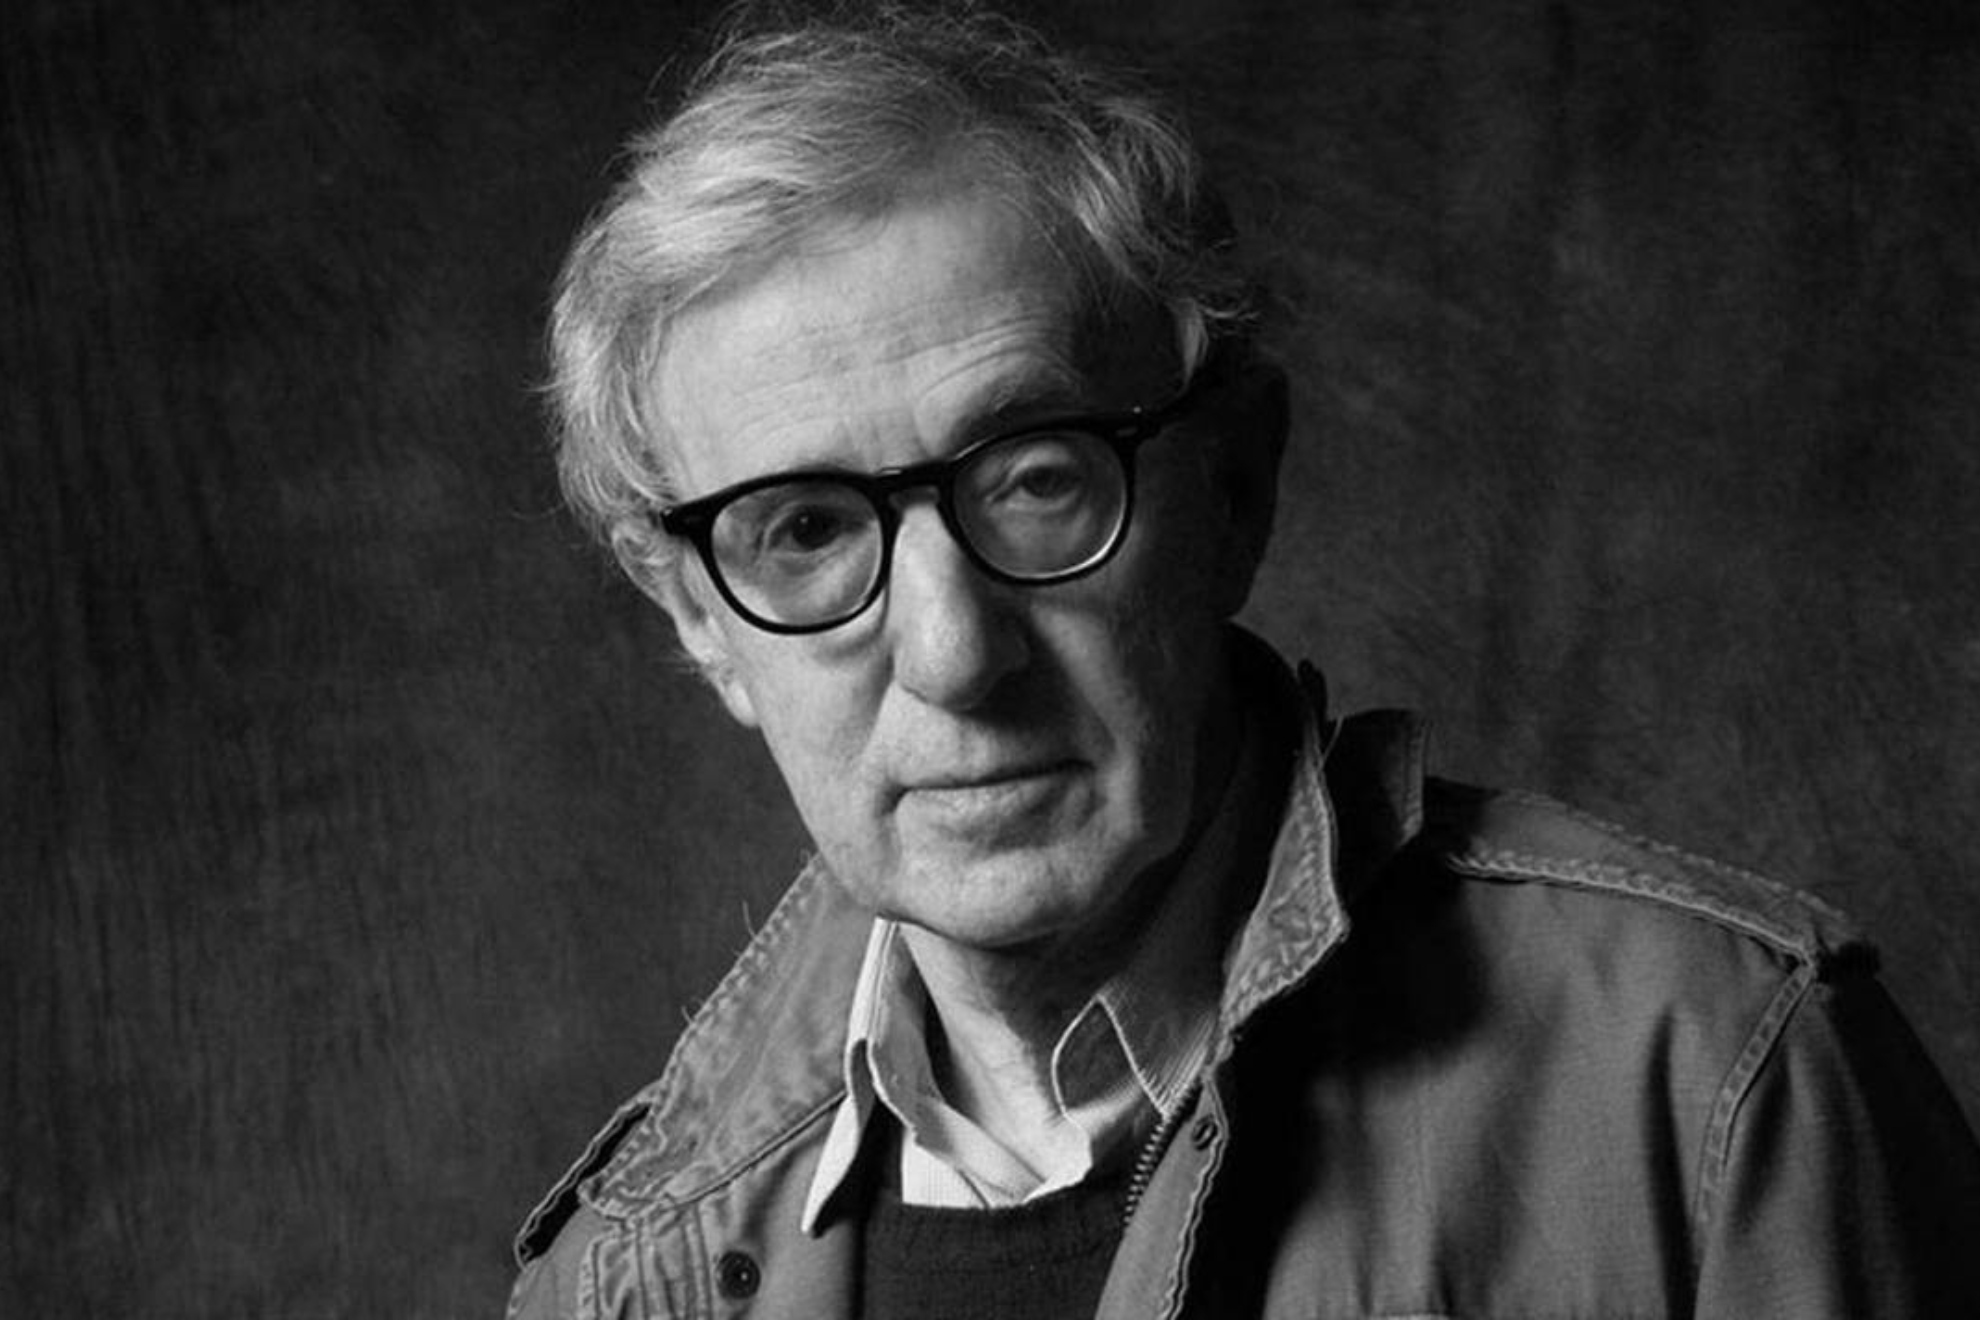 Woody Allen's latest film will be his 50th and his last one